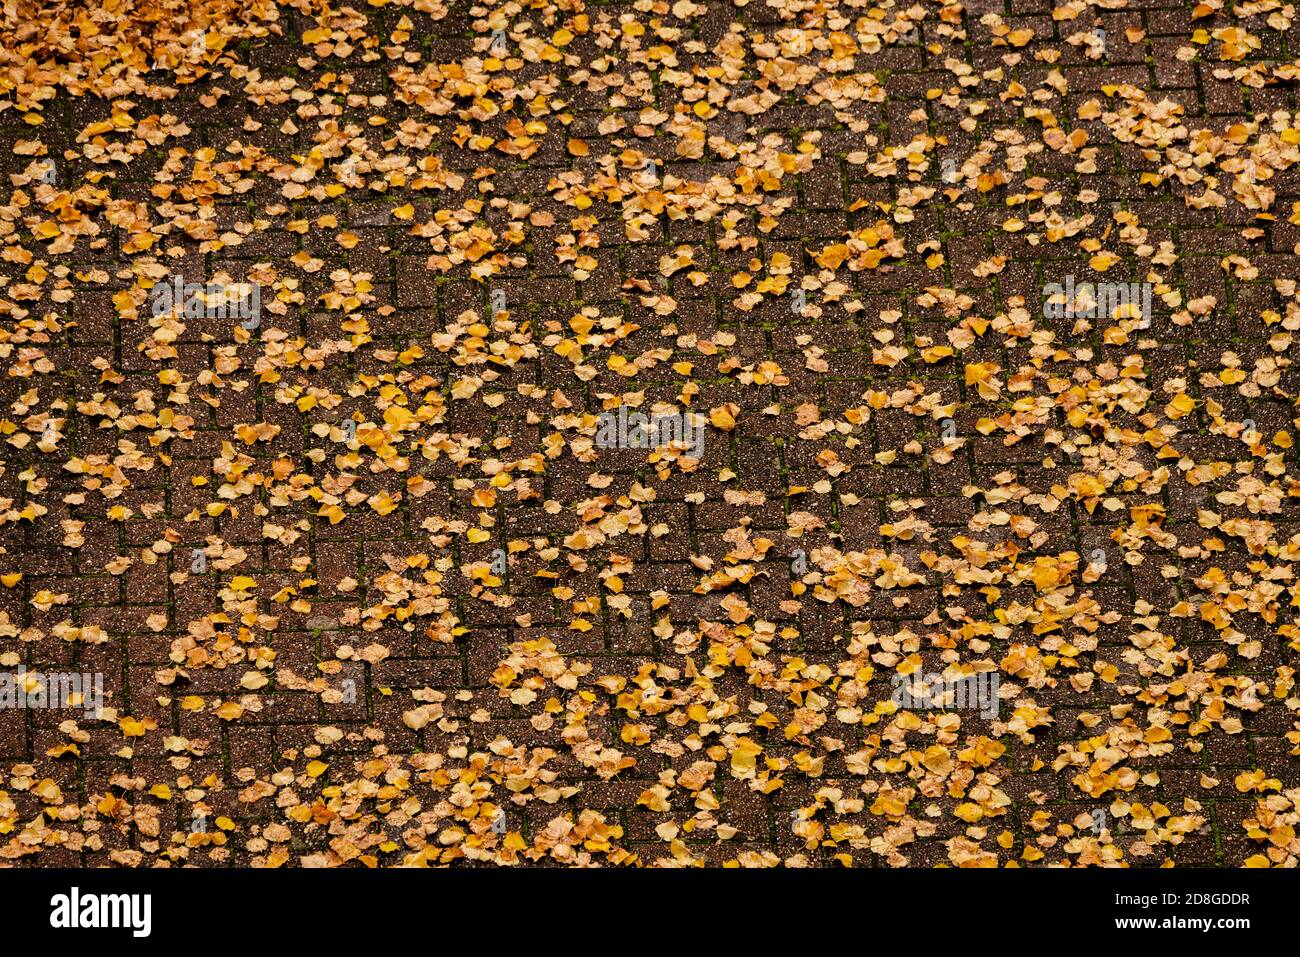 Aerial perspective of orange and yellow fall leaves on bricks Stock Photo